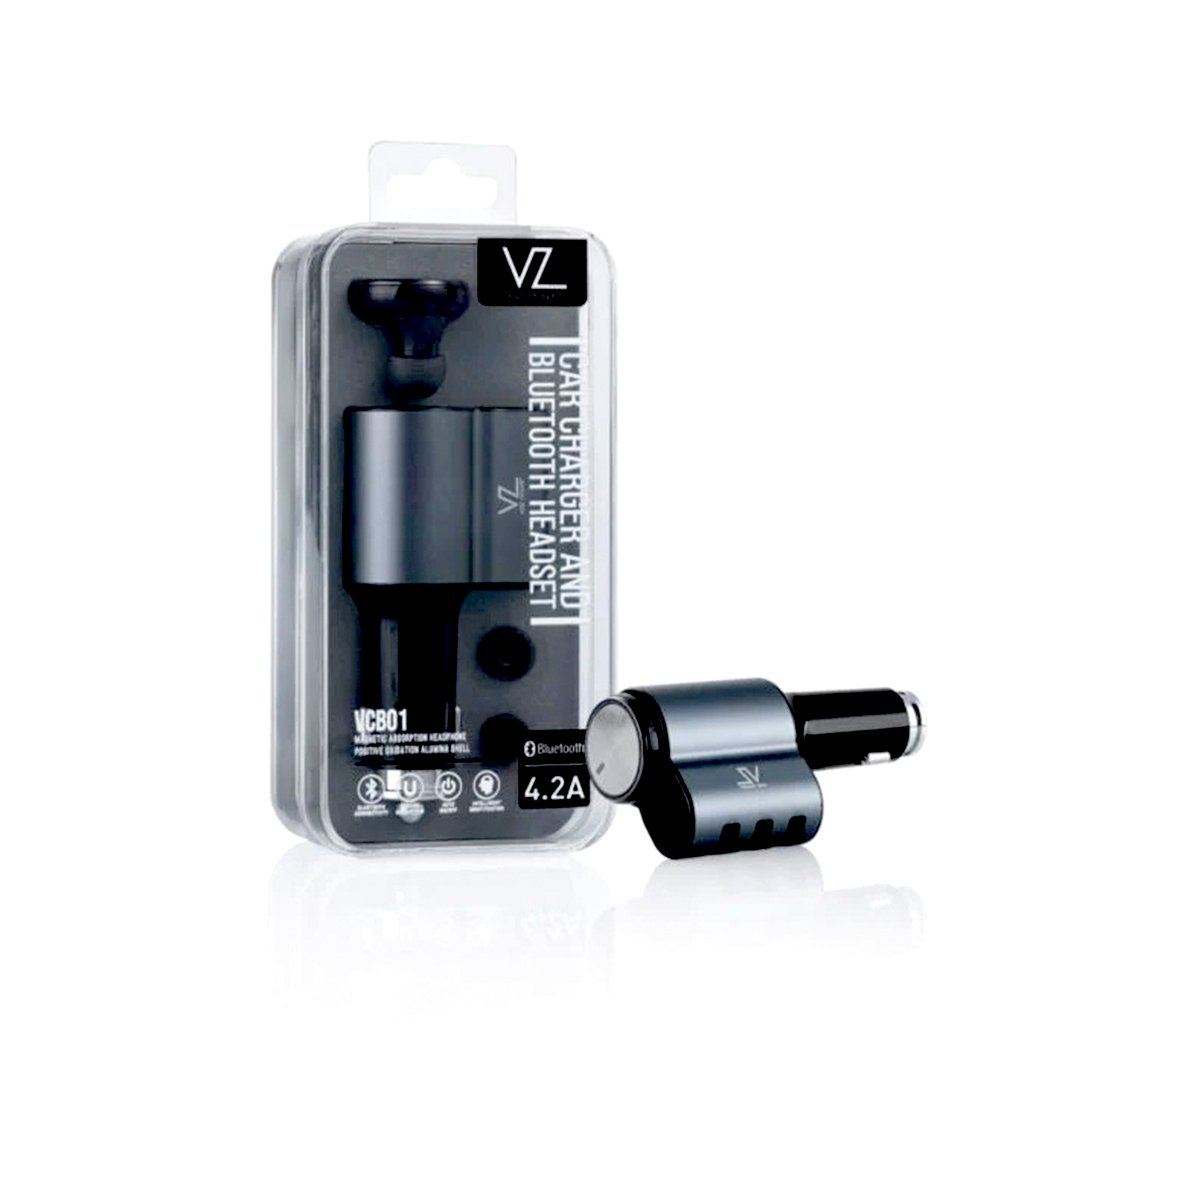 Voz Car Charger Adapter Grey (VCB01)